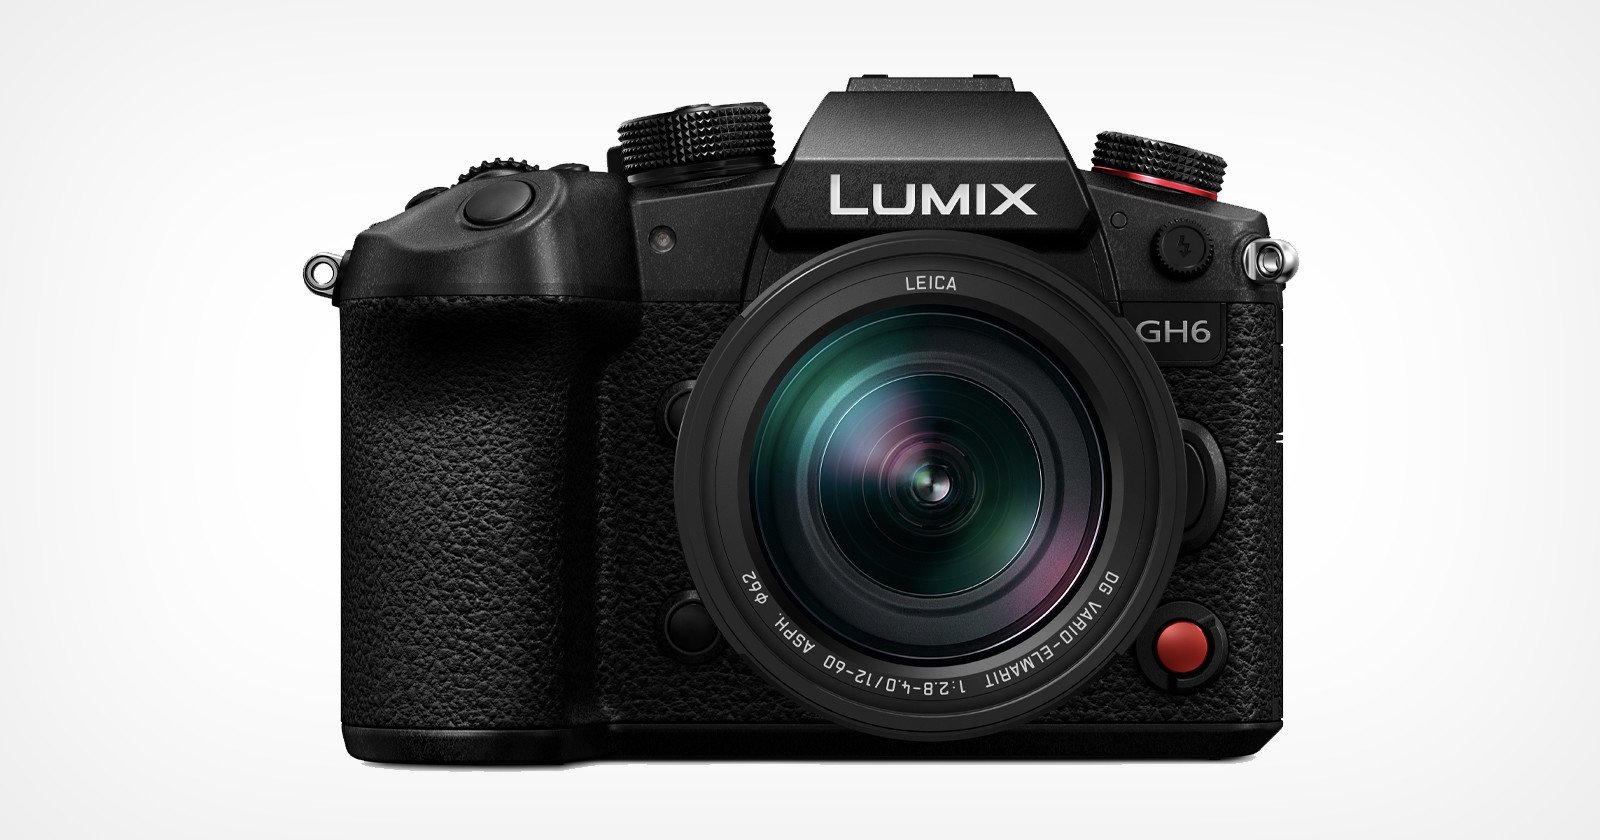 Expect Delays: Demand for the Lumix GH6 is Higher Than Anticipated